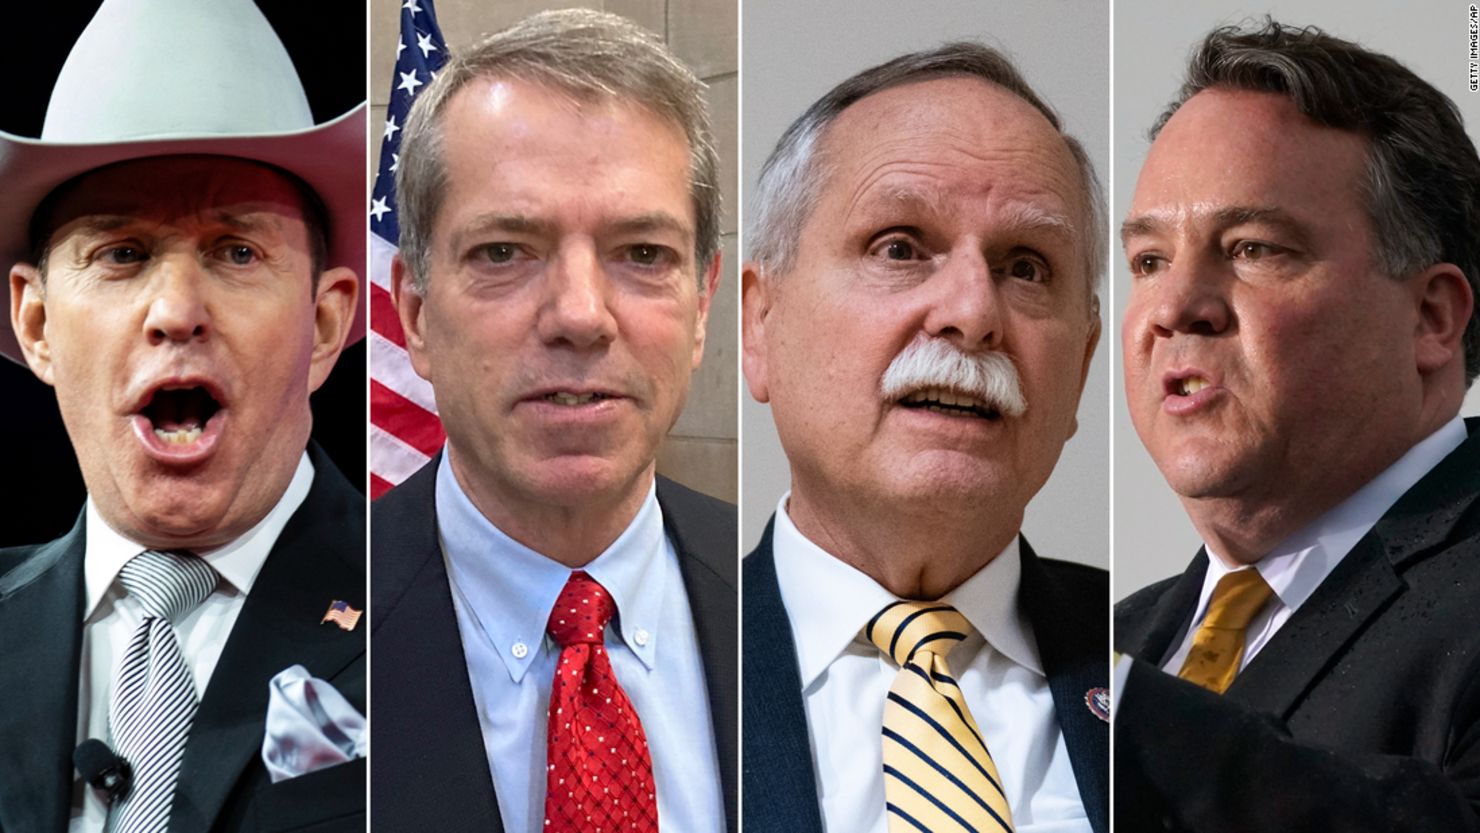 Charles Herbster, left, and Jim Pillen, second left, are running for the GOP nomination for governor in Nebraska. Reps. David McKinley, second right, and Rep. Alex Mooney, right, are vying for the same US House seat in West Virginia. 